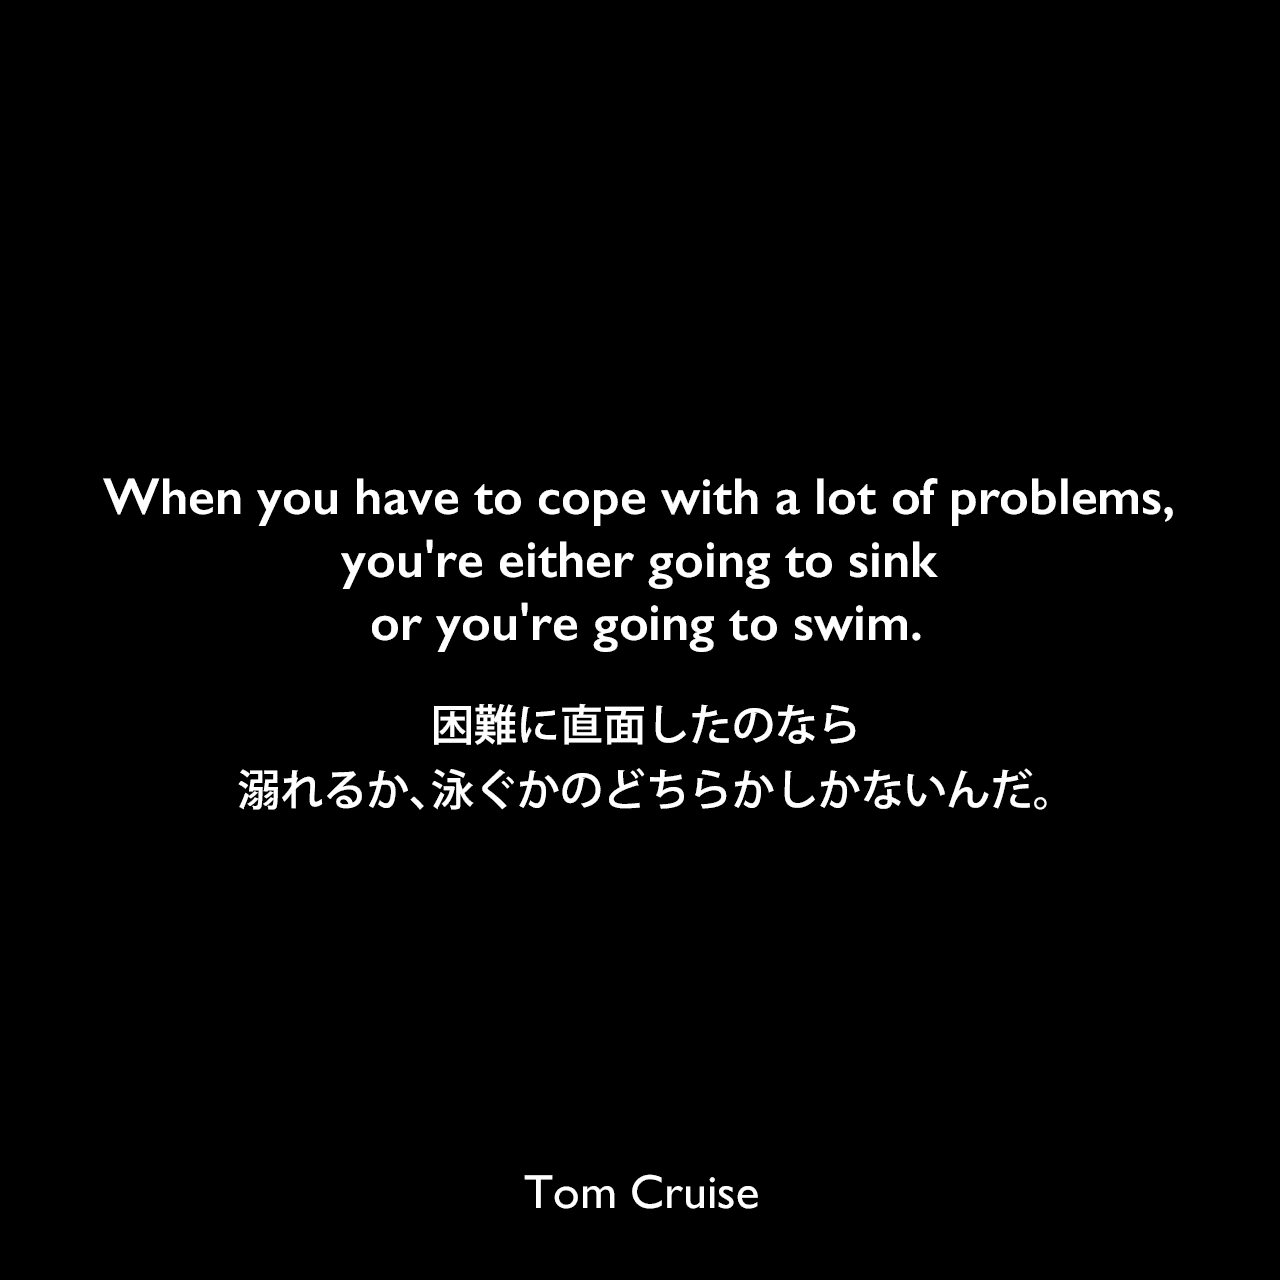 When you have to cope with a lot of problems, you're either going to sink or you're going to swim.困難に直面したのなら、溺れるか、泳ぐかのどちらかしかないんだ。Tom Cruise